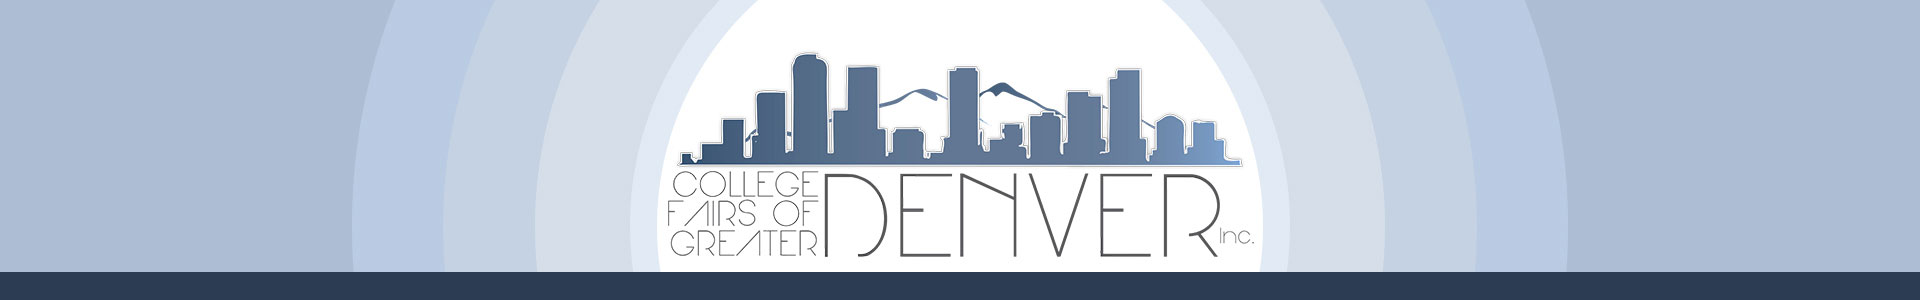 College Fairs of Greater Denver